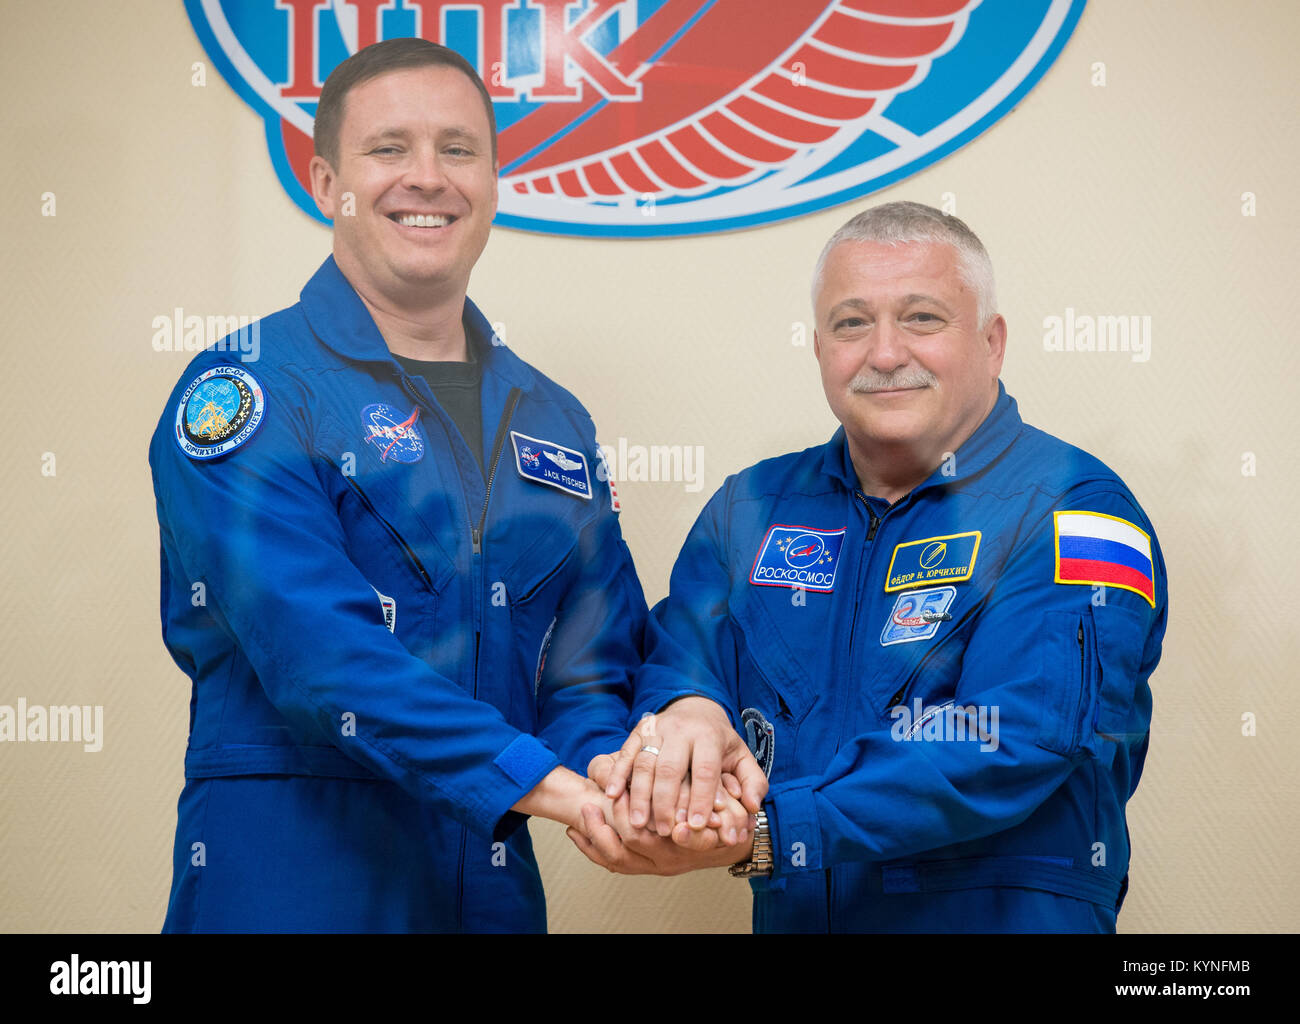 Expedition 51 Flight Engineer Jack Fischer of NASA, left, poses for a photo with Soyuz Commander Fyodor Yurchikhin of Roscosmos, right, at the conclusion of a pre-launch press conference on Wednesday, April 19, 2017 at the Cosmonaut Hotel in Baikonur, Kazakhstan. Launch of the Soyuz rocket is scheduled for April 20 and will carry Yurchikhin and Fischer into orbit to begin their four and a half month mission on the International Space Station. Photo Credit: (NASA/Aubrey Gemignani) Stock Photo